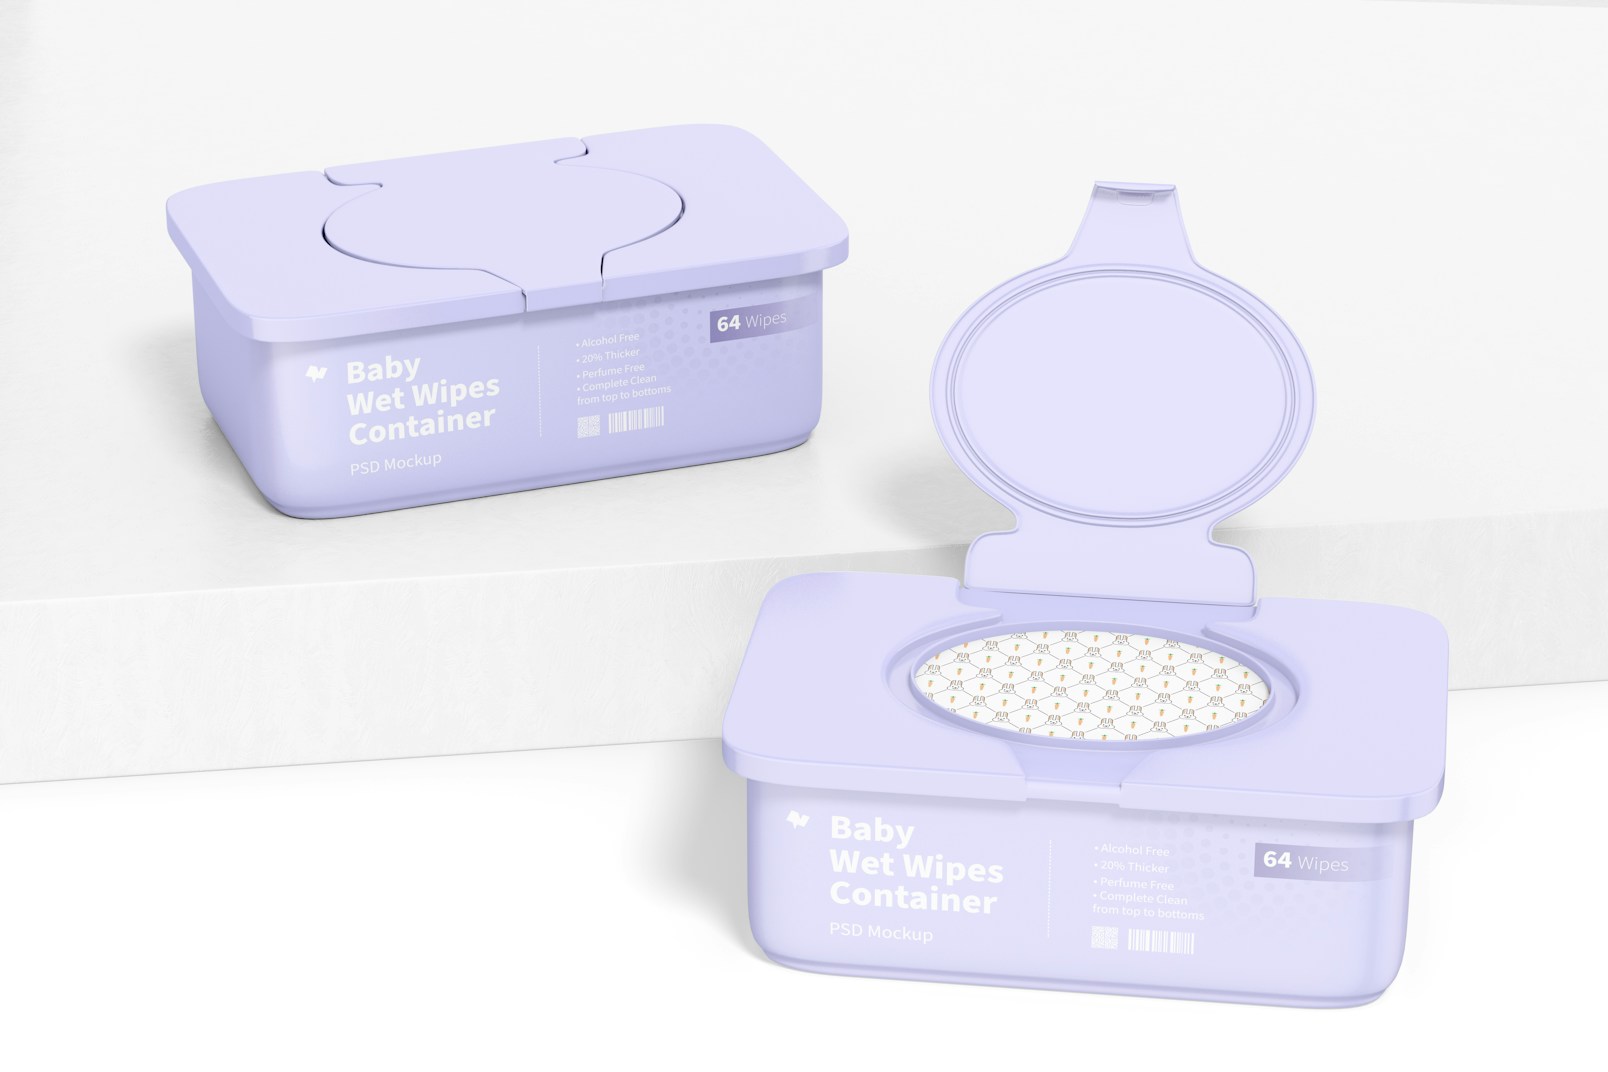 Baby Wet Wipes Containers Mockup, Perspective